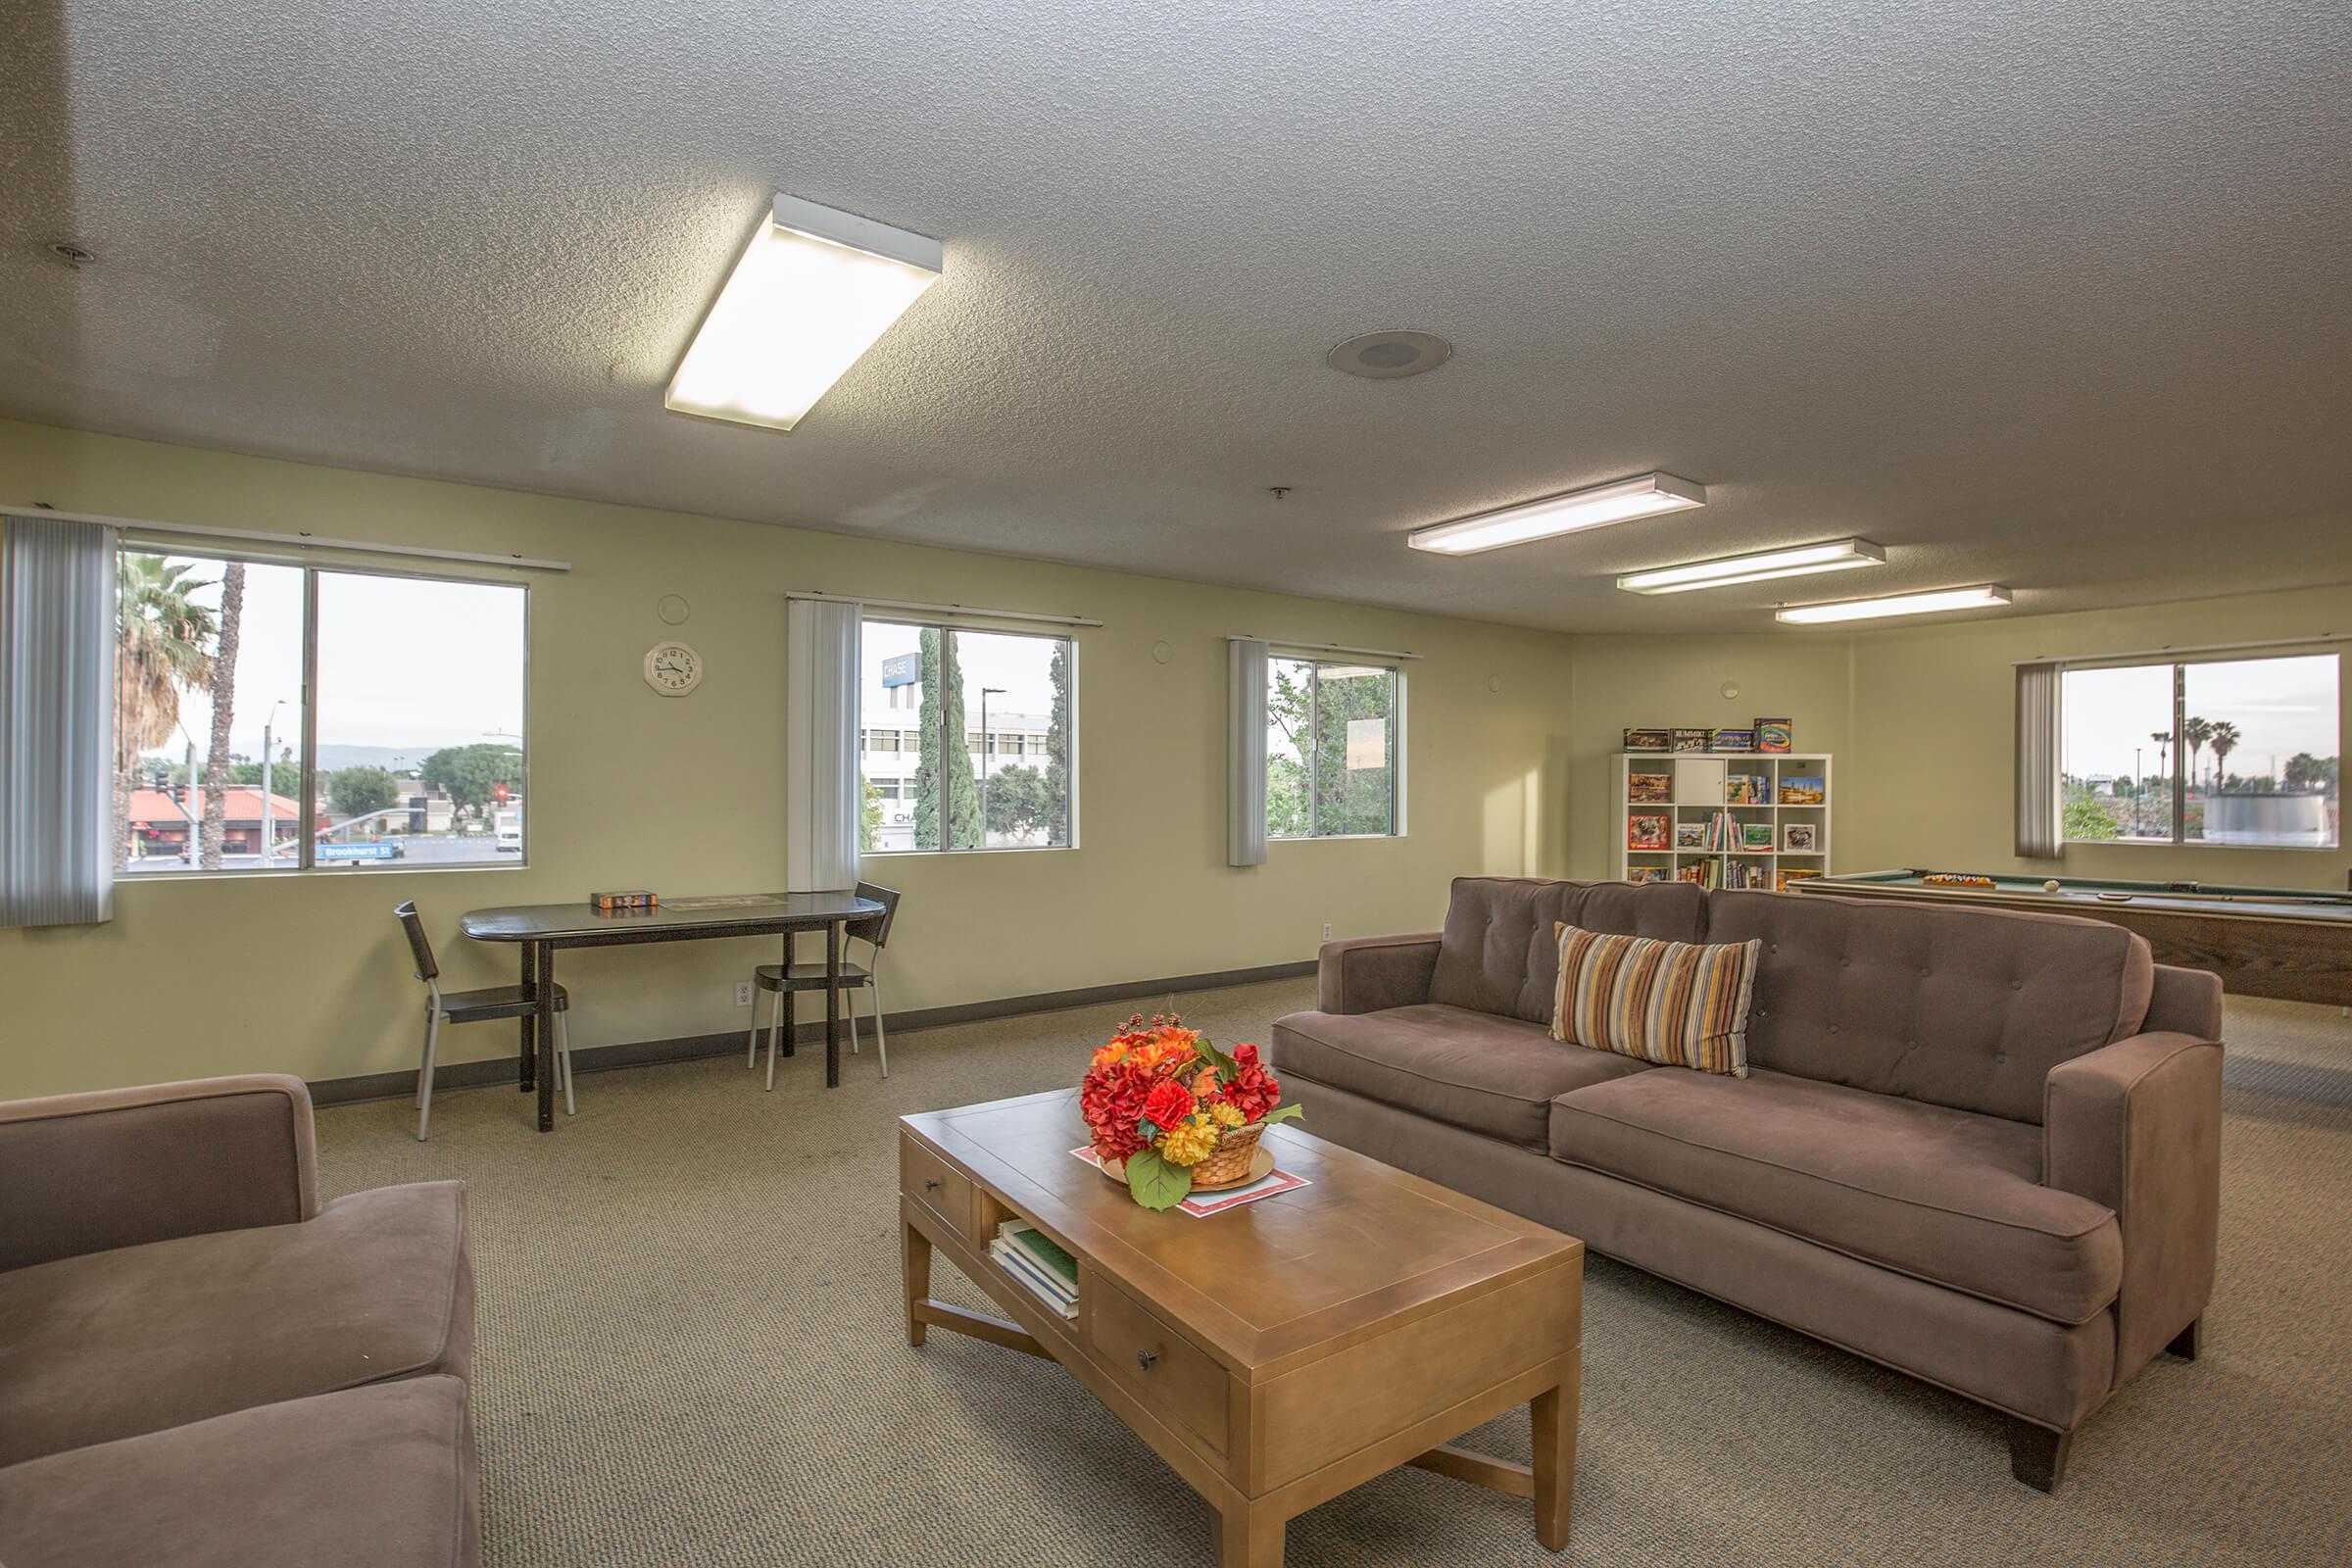 Community room with brown couches